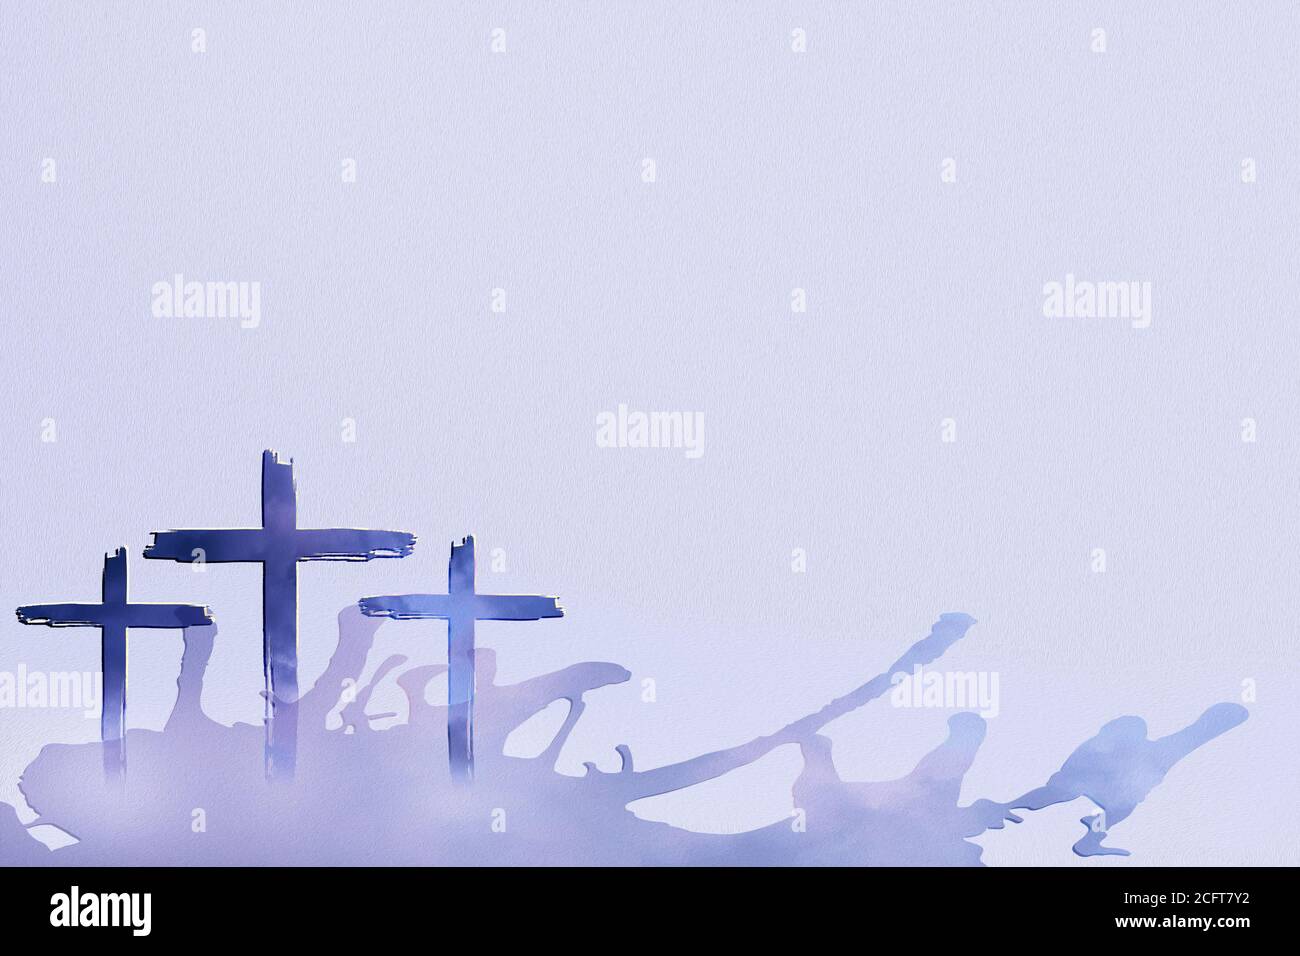 Christian worship and praise. Three crosses with cloudy sky background, water splashes and empty space. Stock Photo